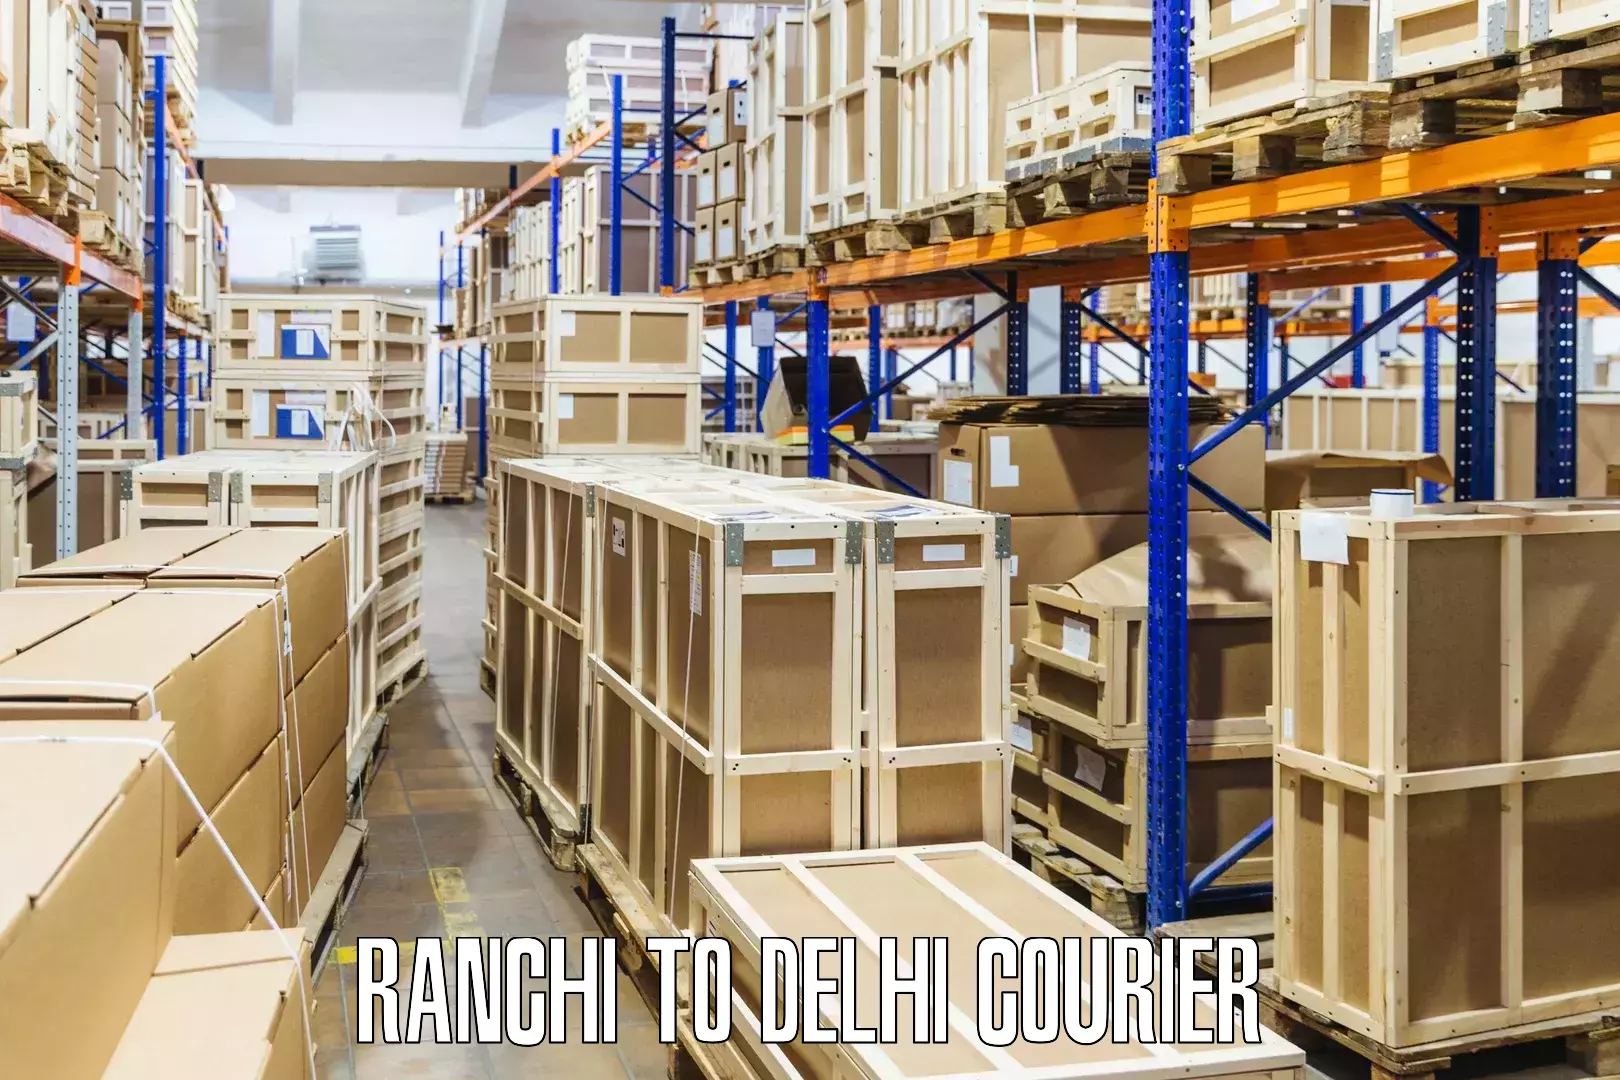 Urban courier service Ranchi to NCR